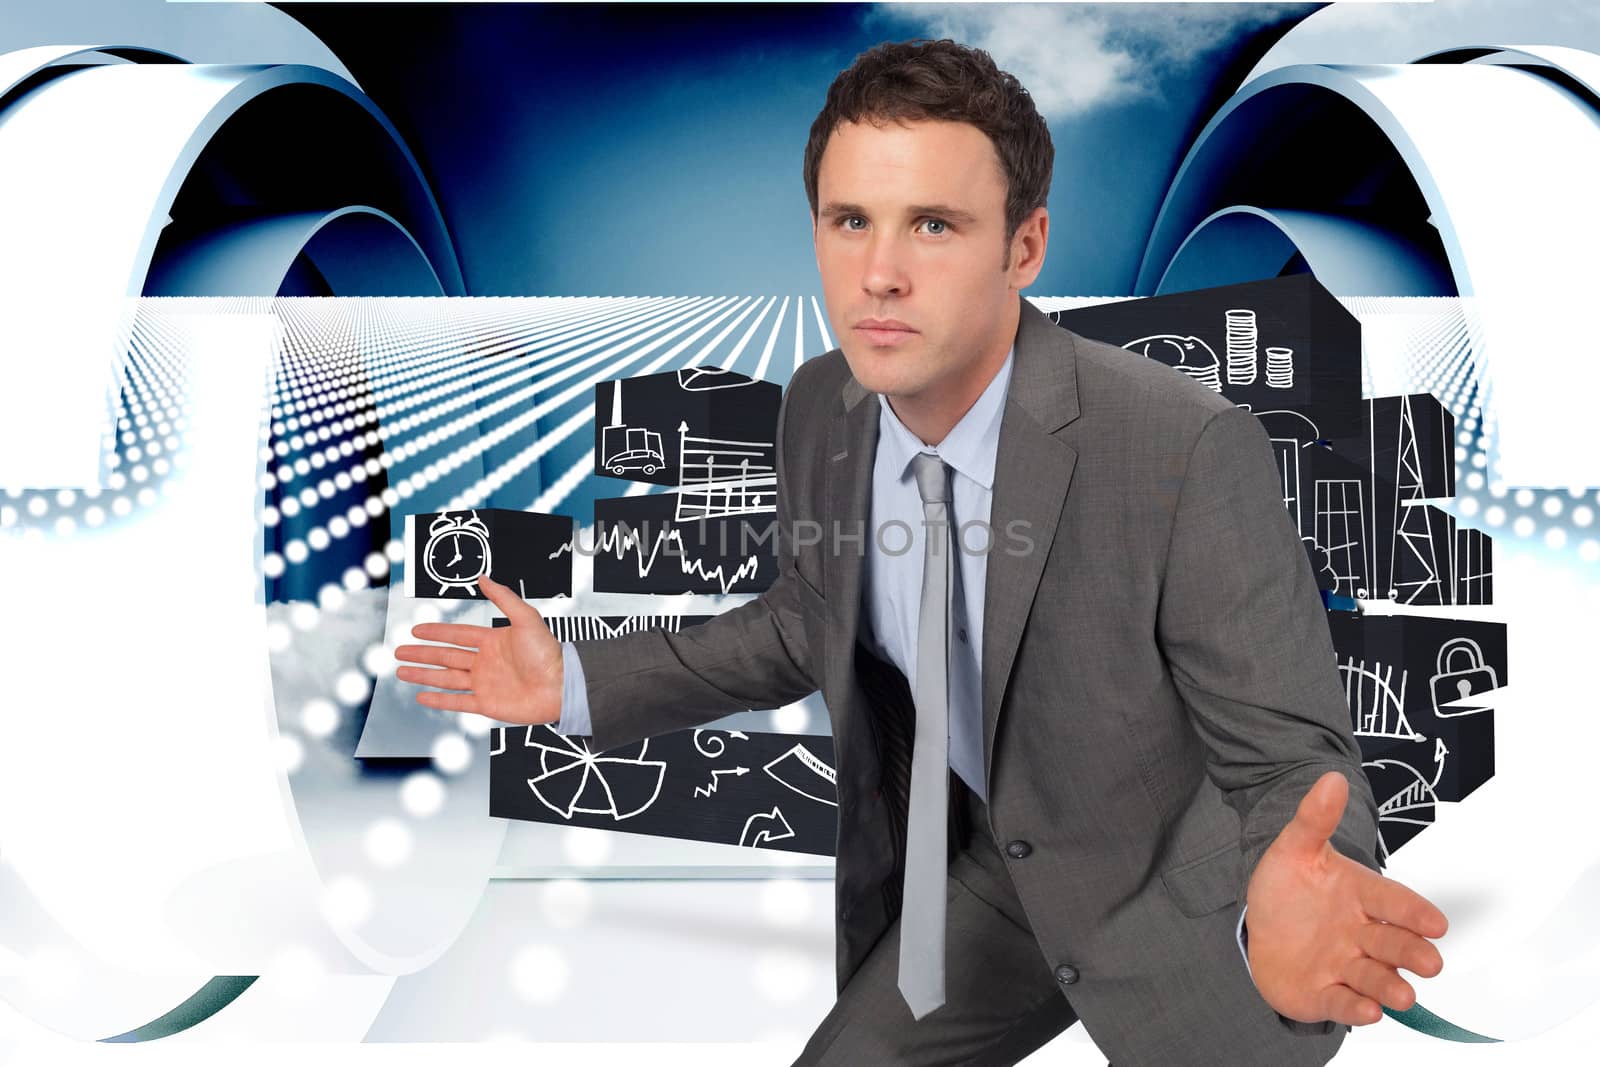 Businessman posing with hands out against abstract design in blue and white